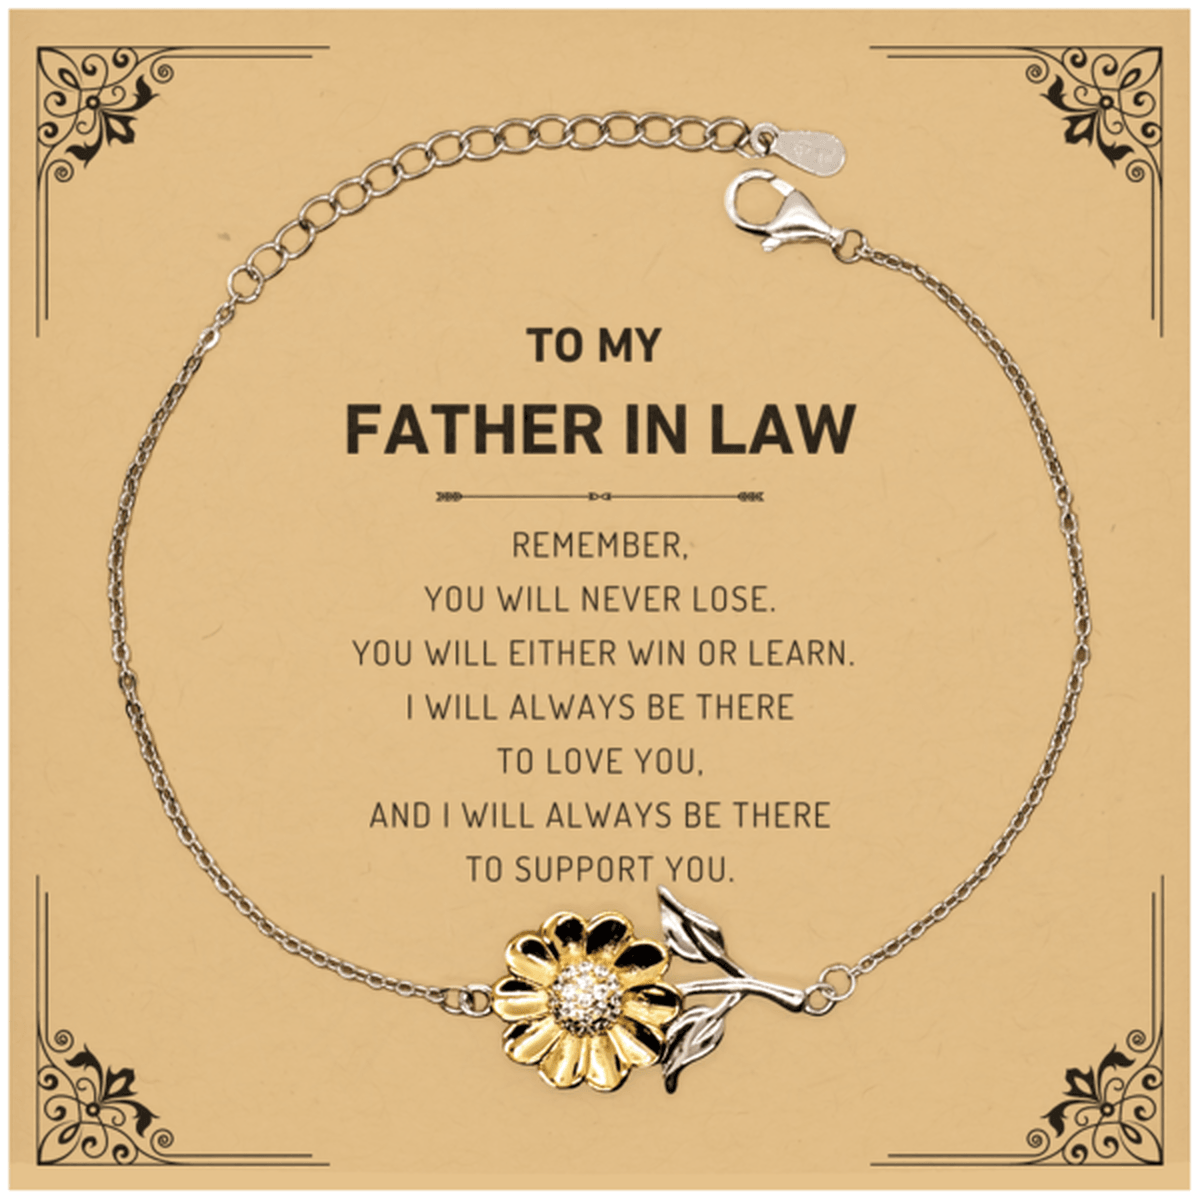 Father In Law Gifts, To My Father In Law Remember, you will never lose. You will either WIN or LEARN, Keepsake Sunflower Bracelet For Father In Law Card, Birthday Christmas Gifts Ideas For Father In Law X-mas Gifts